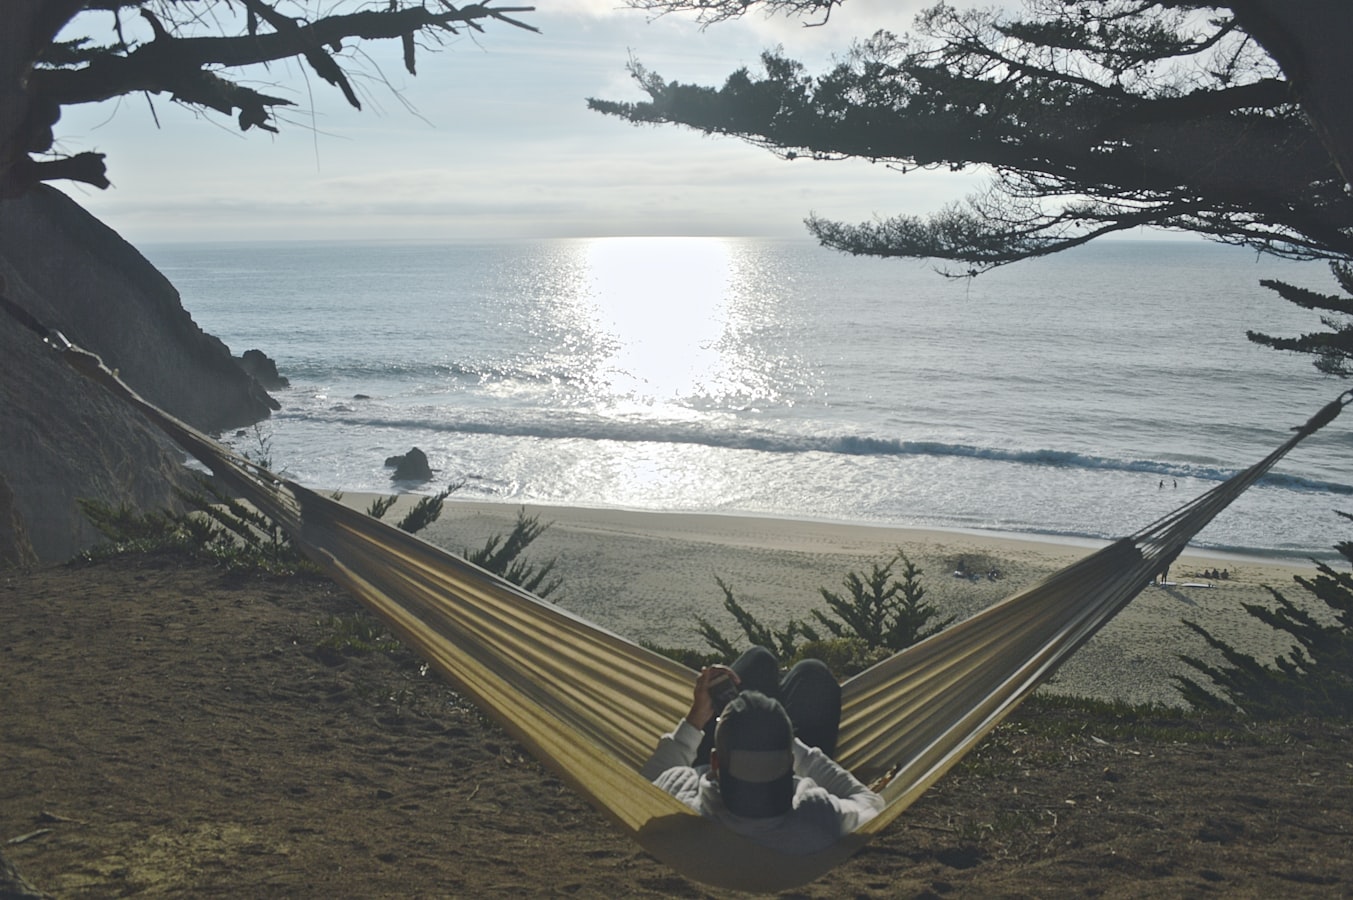 How to Choose a Hammock for Your Next Outdoor Adventure